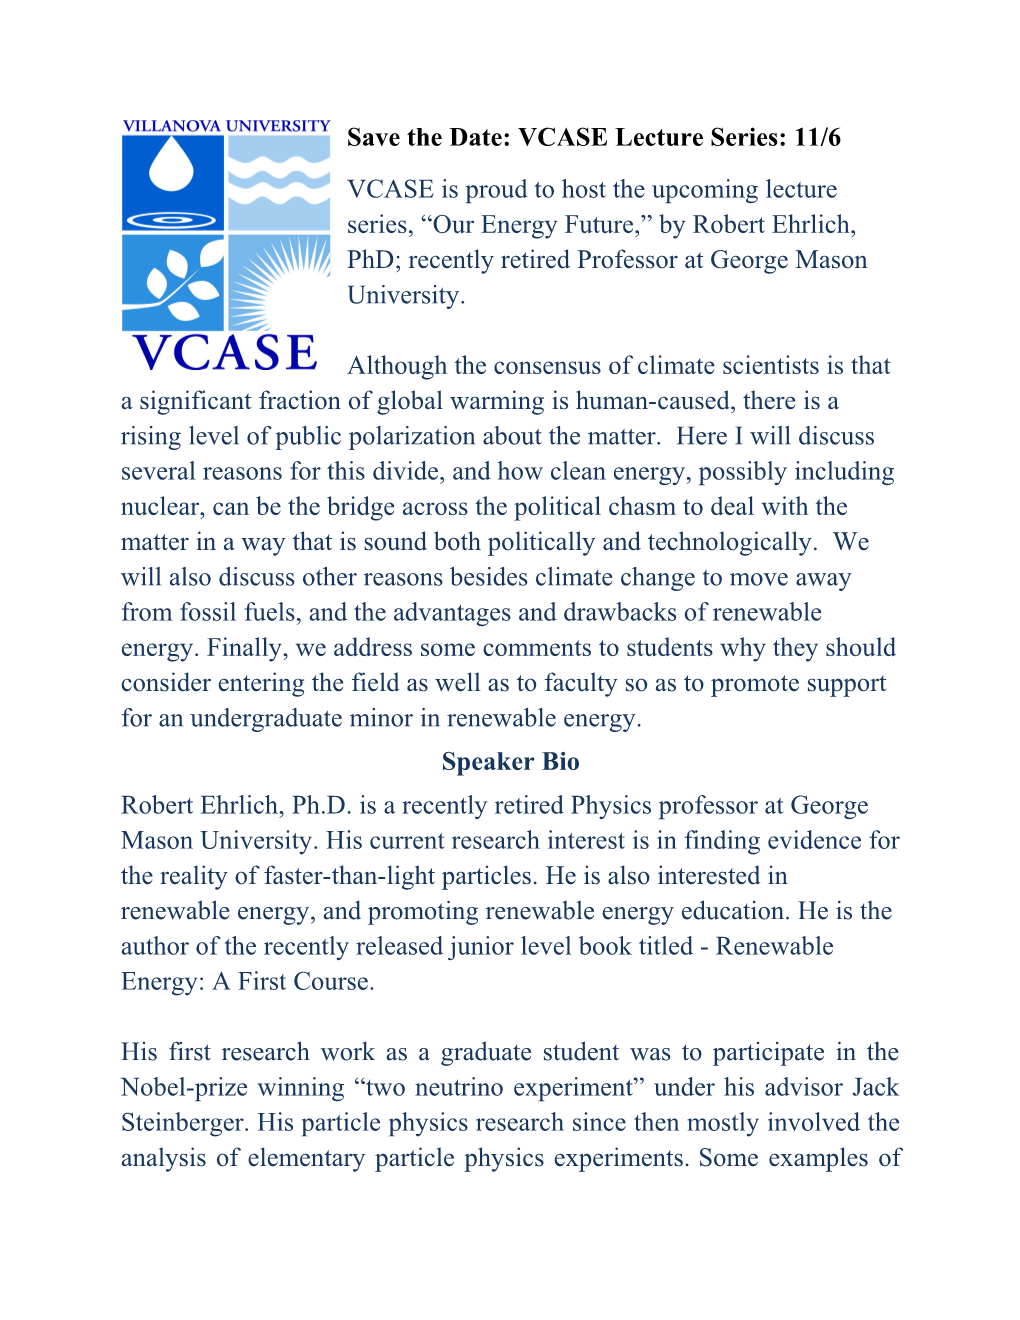 Save the Date: VCASE Lecture Series: 11/6